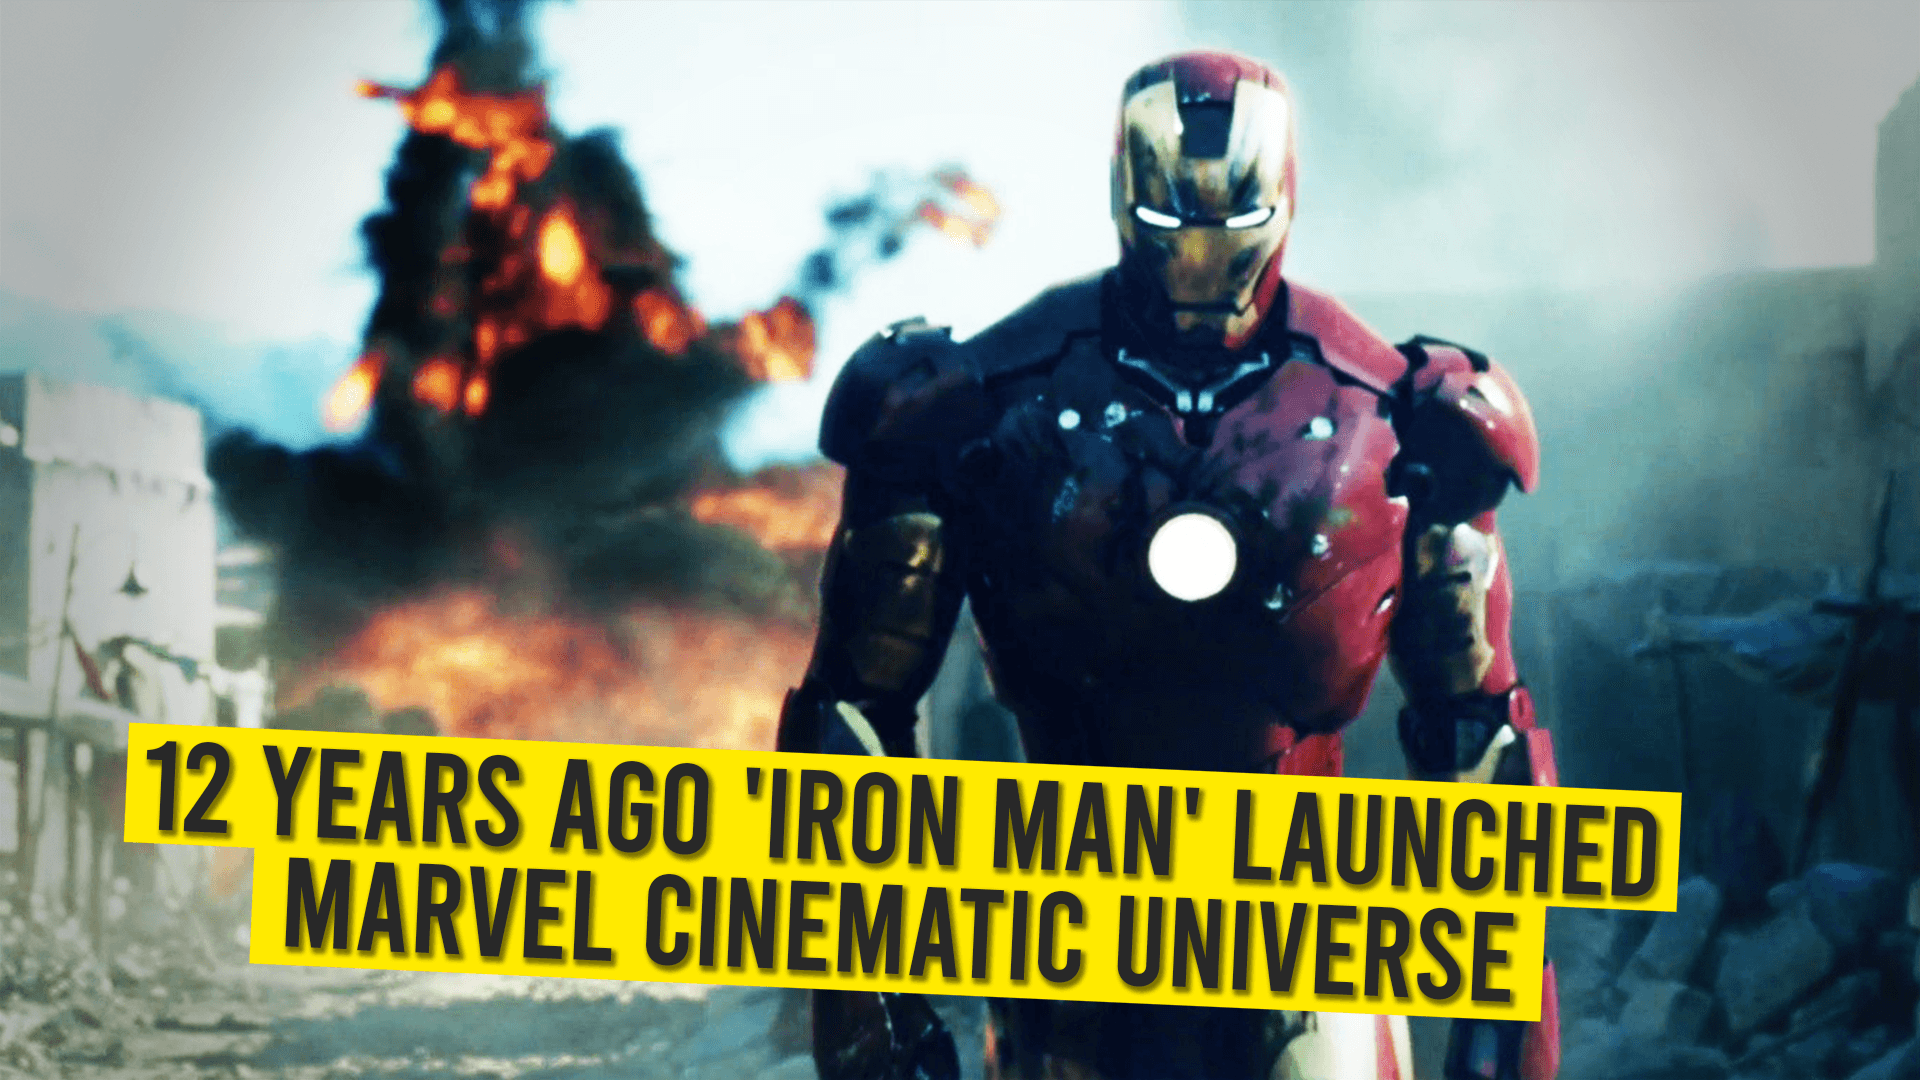 12 Years Ago ‘Iron Man’ Launched Marvel Cinematic Universe